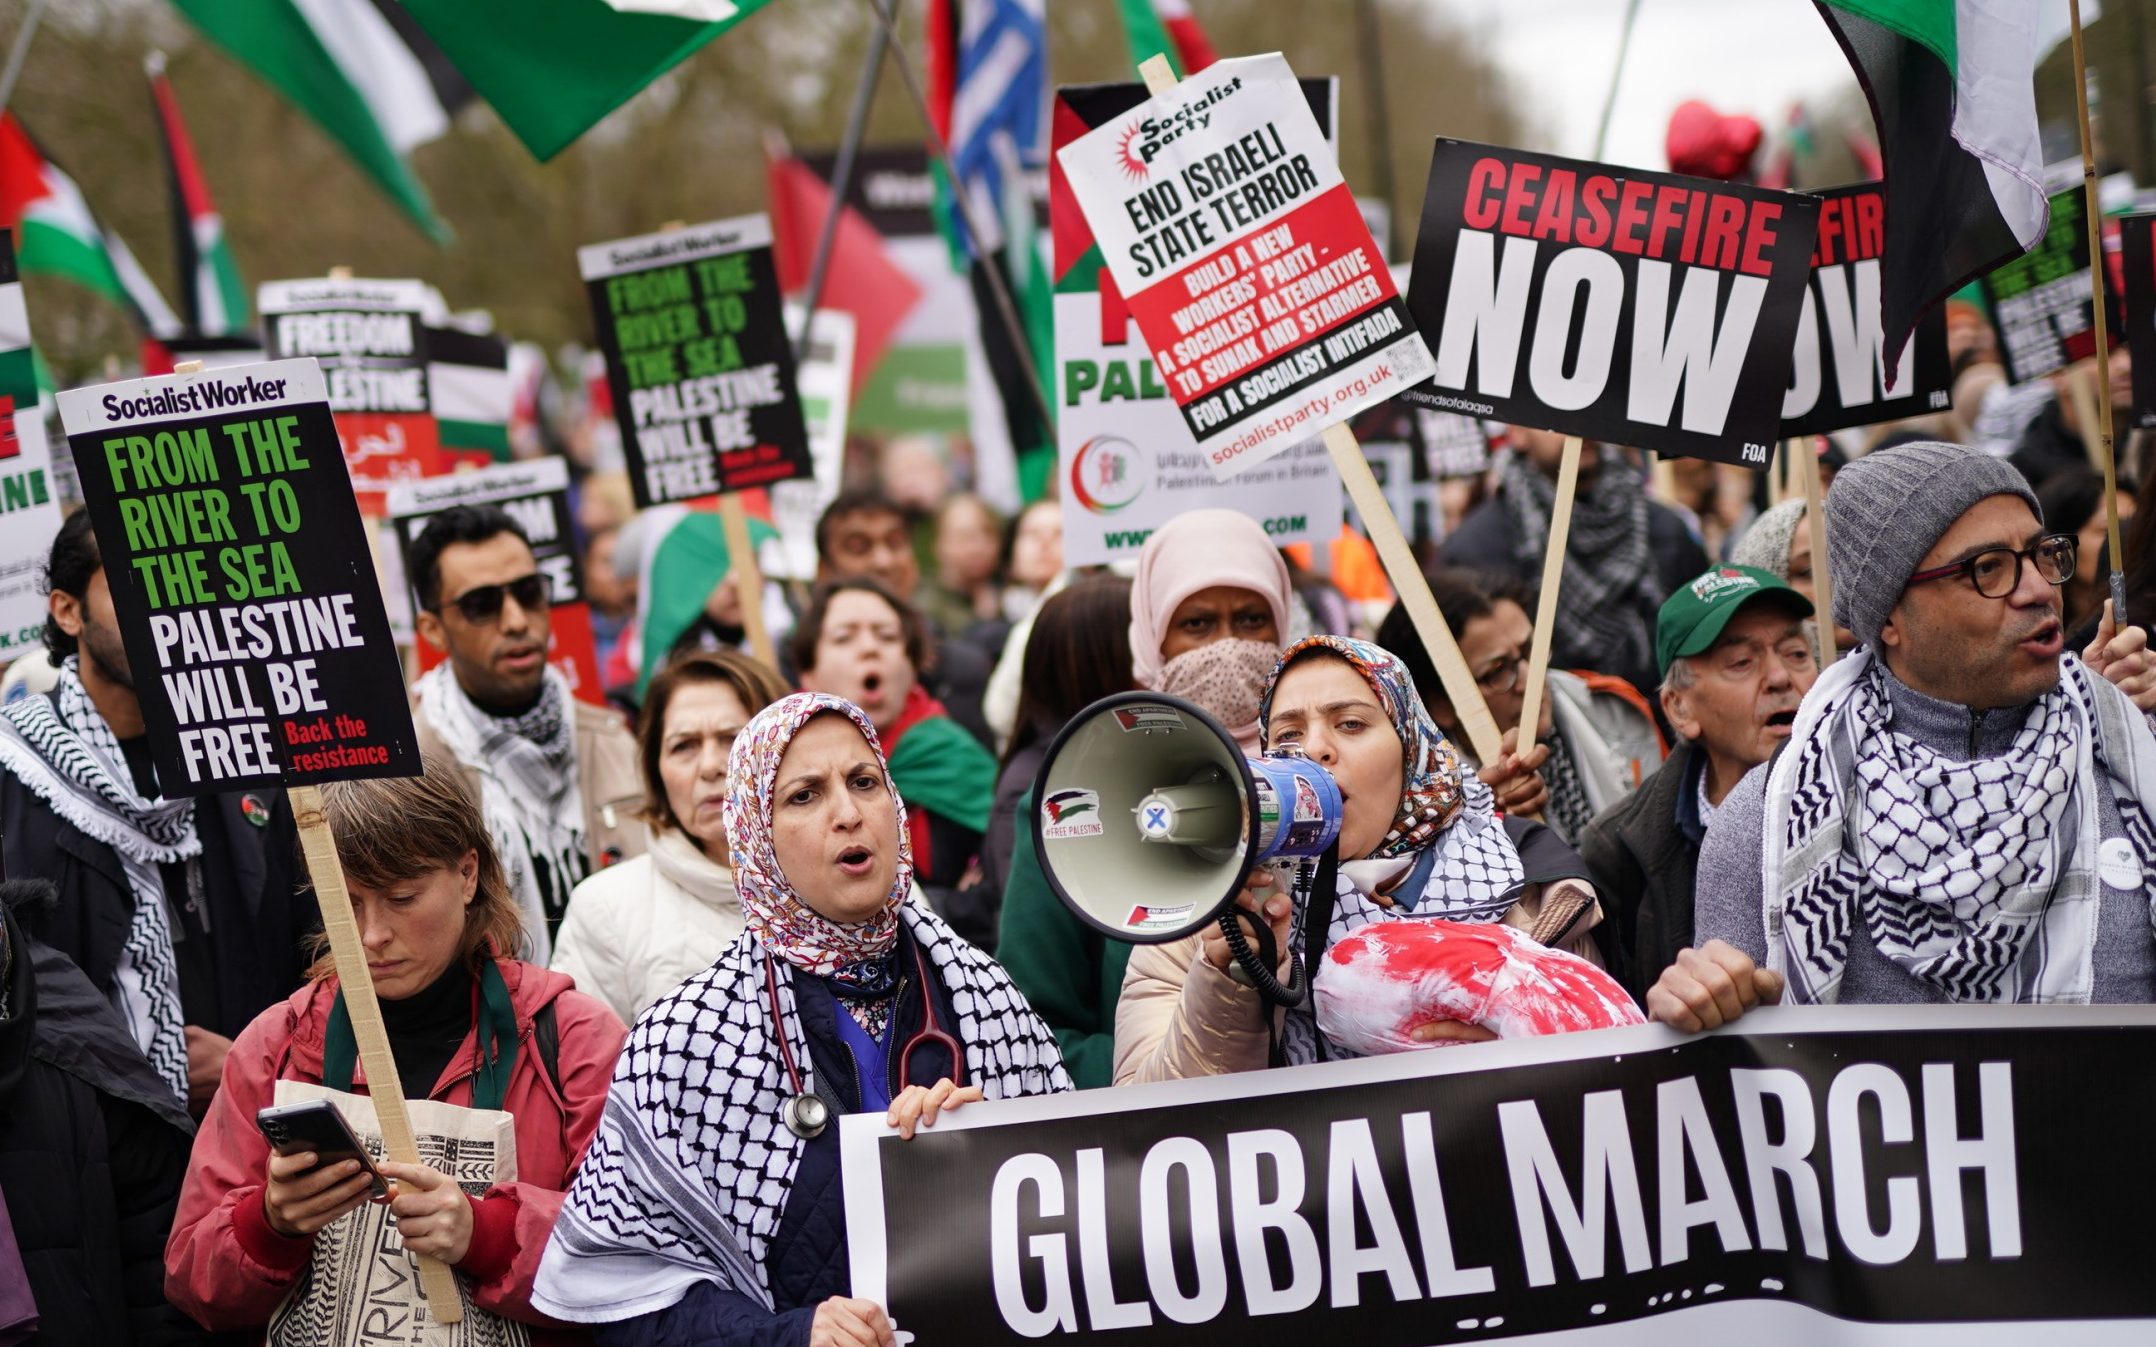 activist arrested at pro-palestine protest as thousands march to israeli embassy